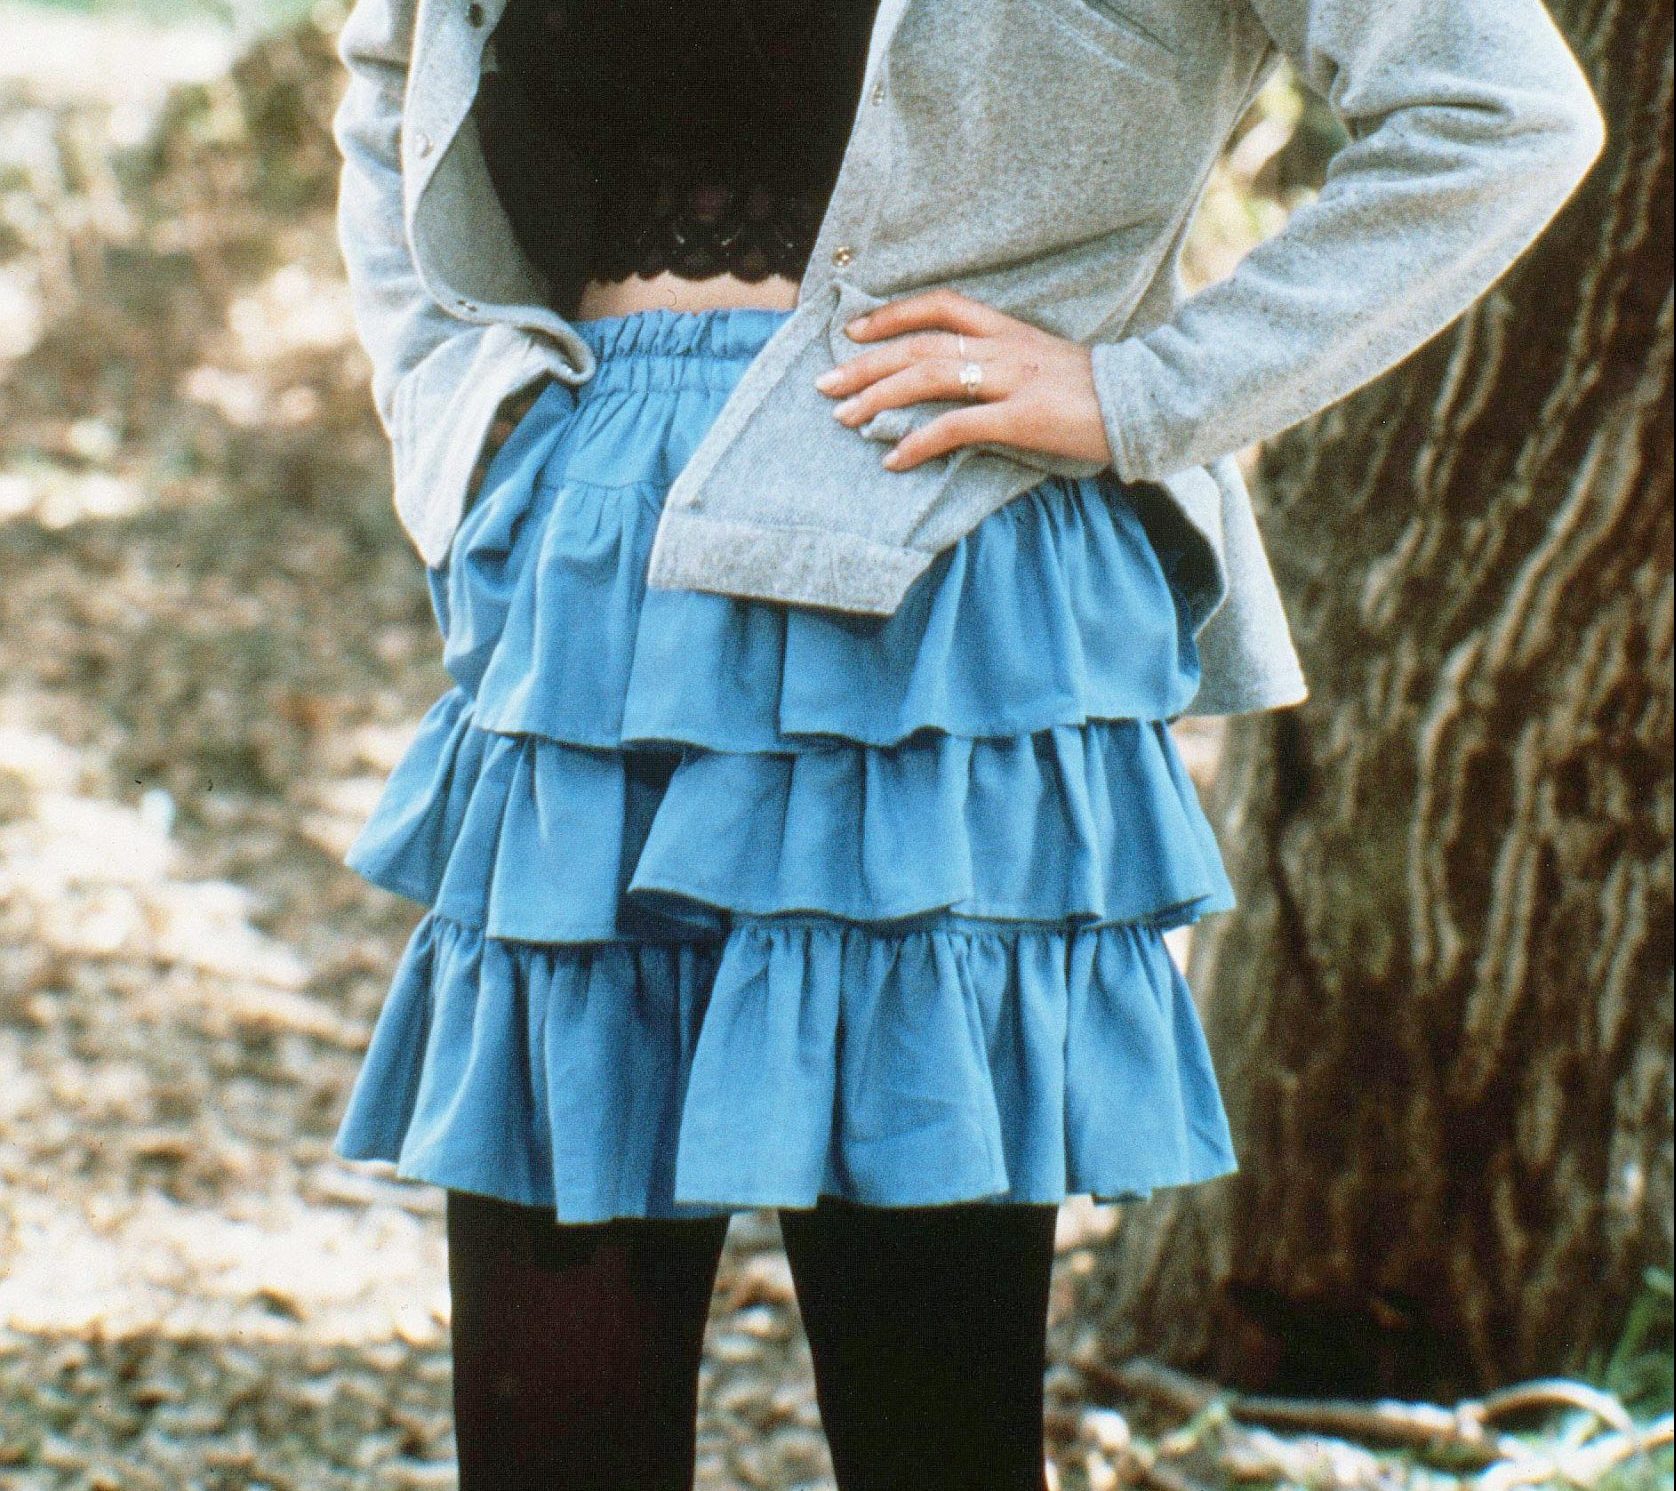 Awesome '80s fashion | Love those acid-washed skirts and sho… | Flickr